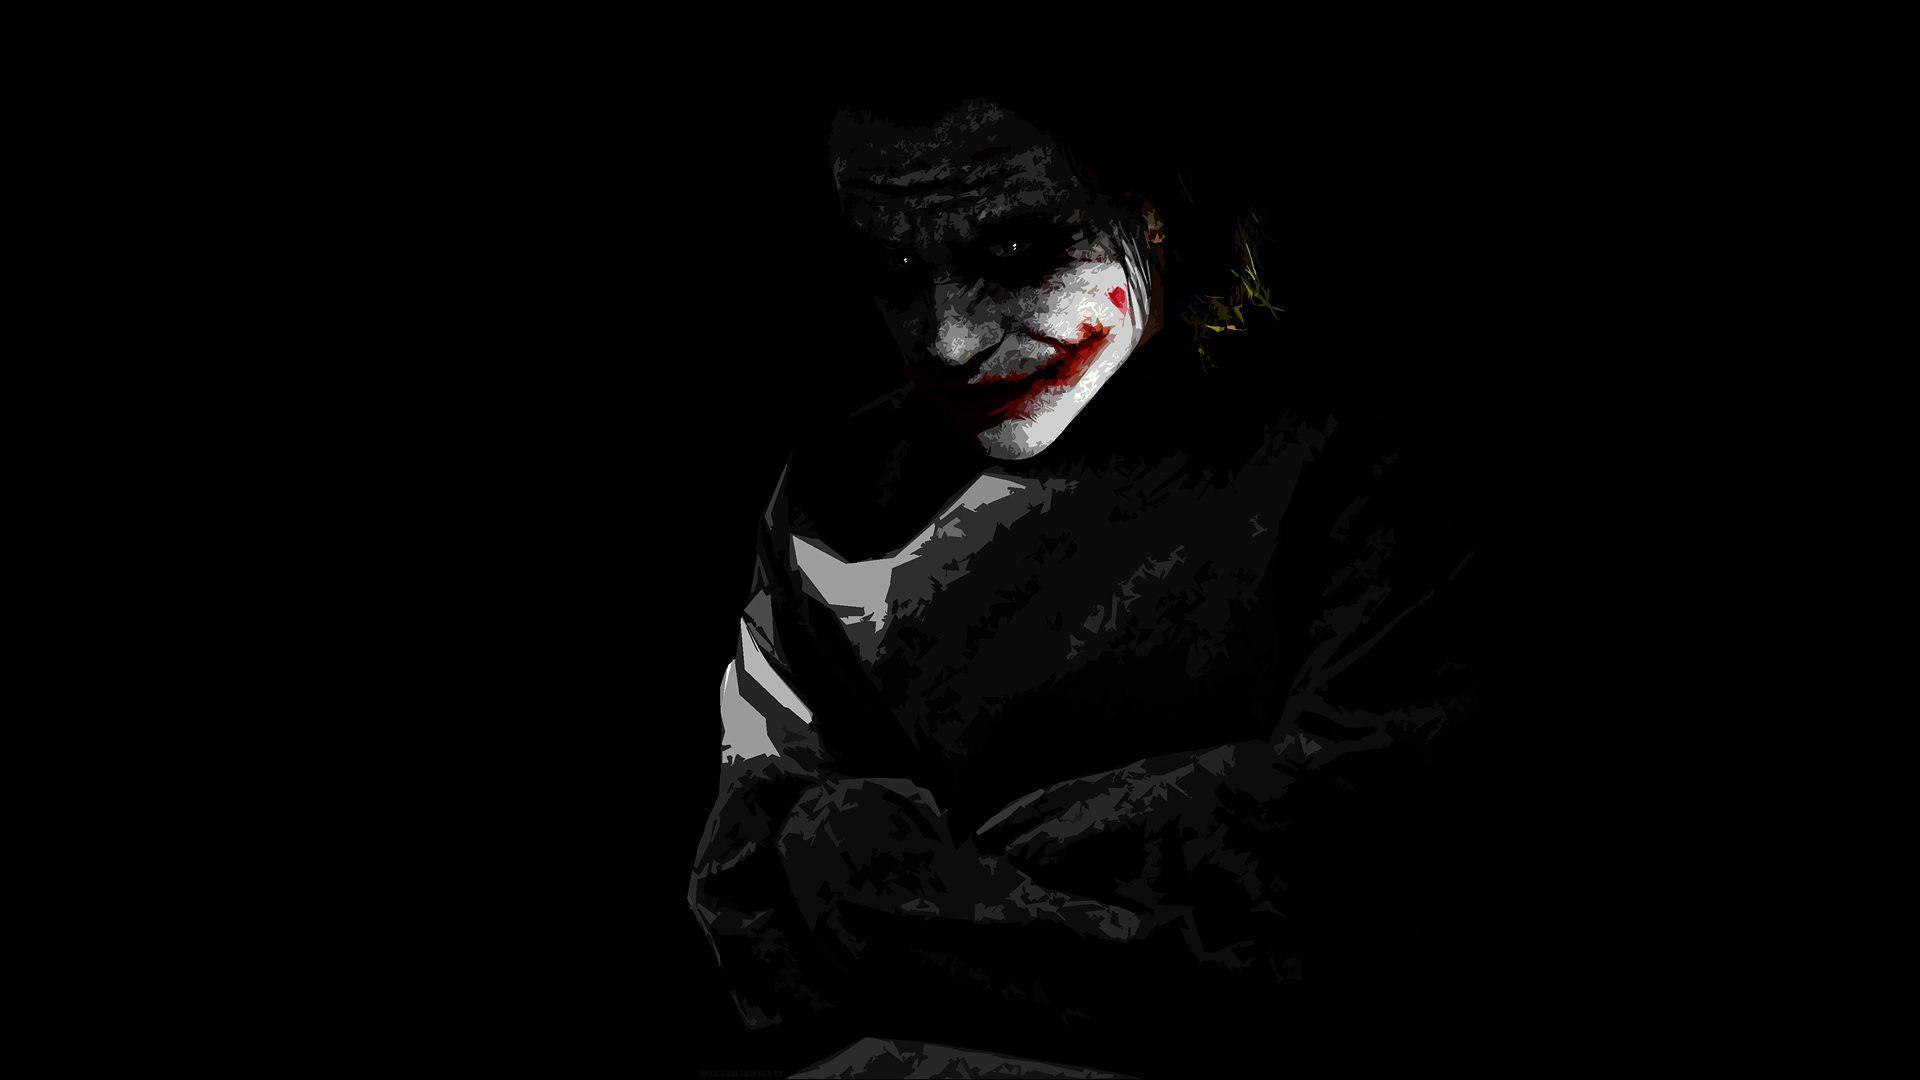 Free Download Joker Hd Wallpapers 1920x1080 For Your Desktop Mobile And Tablet Explore 73